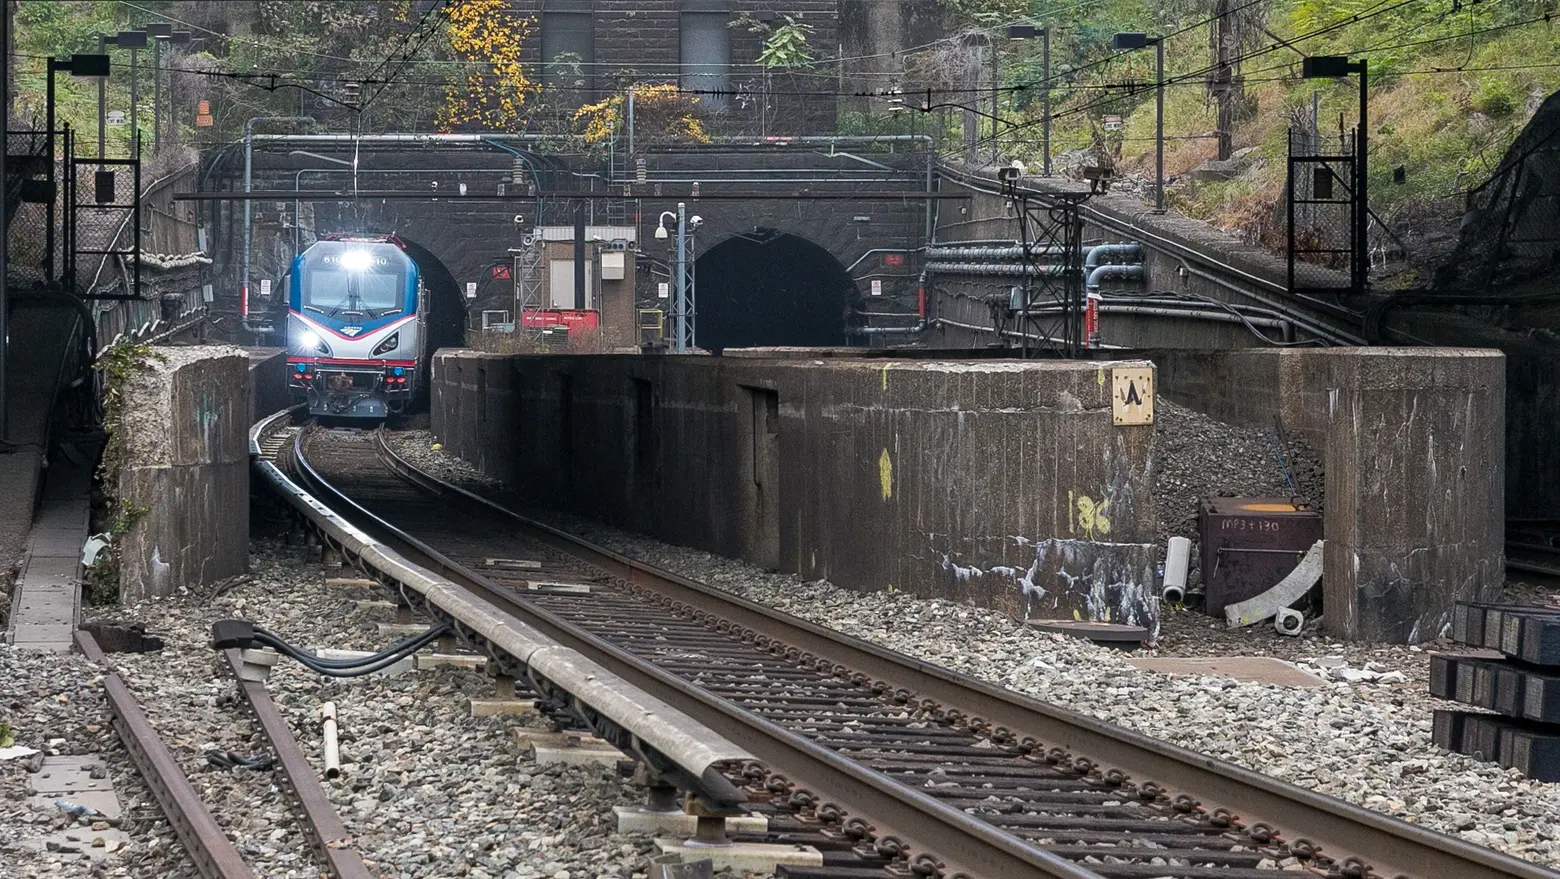 Optimism remains for Hudson River tunnel project despite threat of Trump cuts